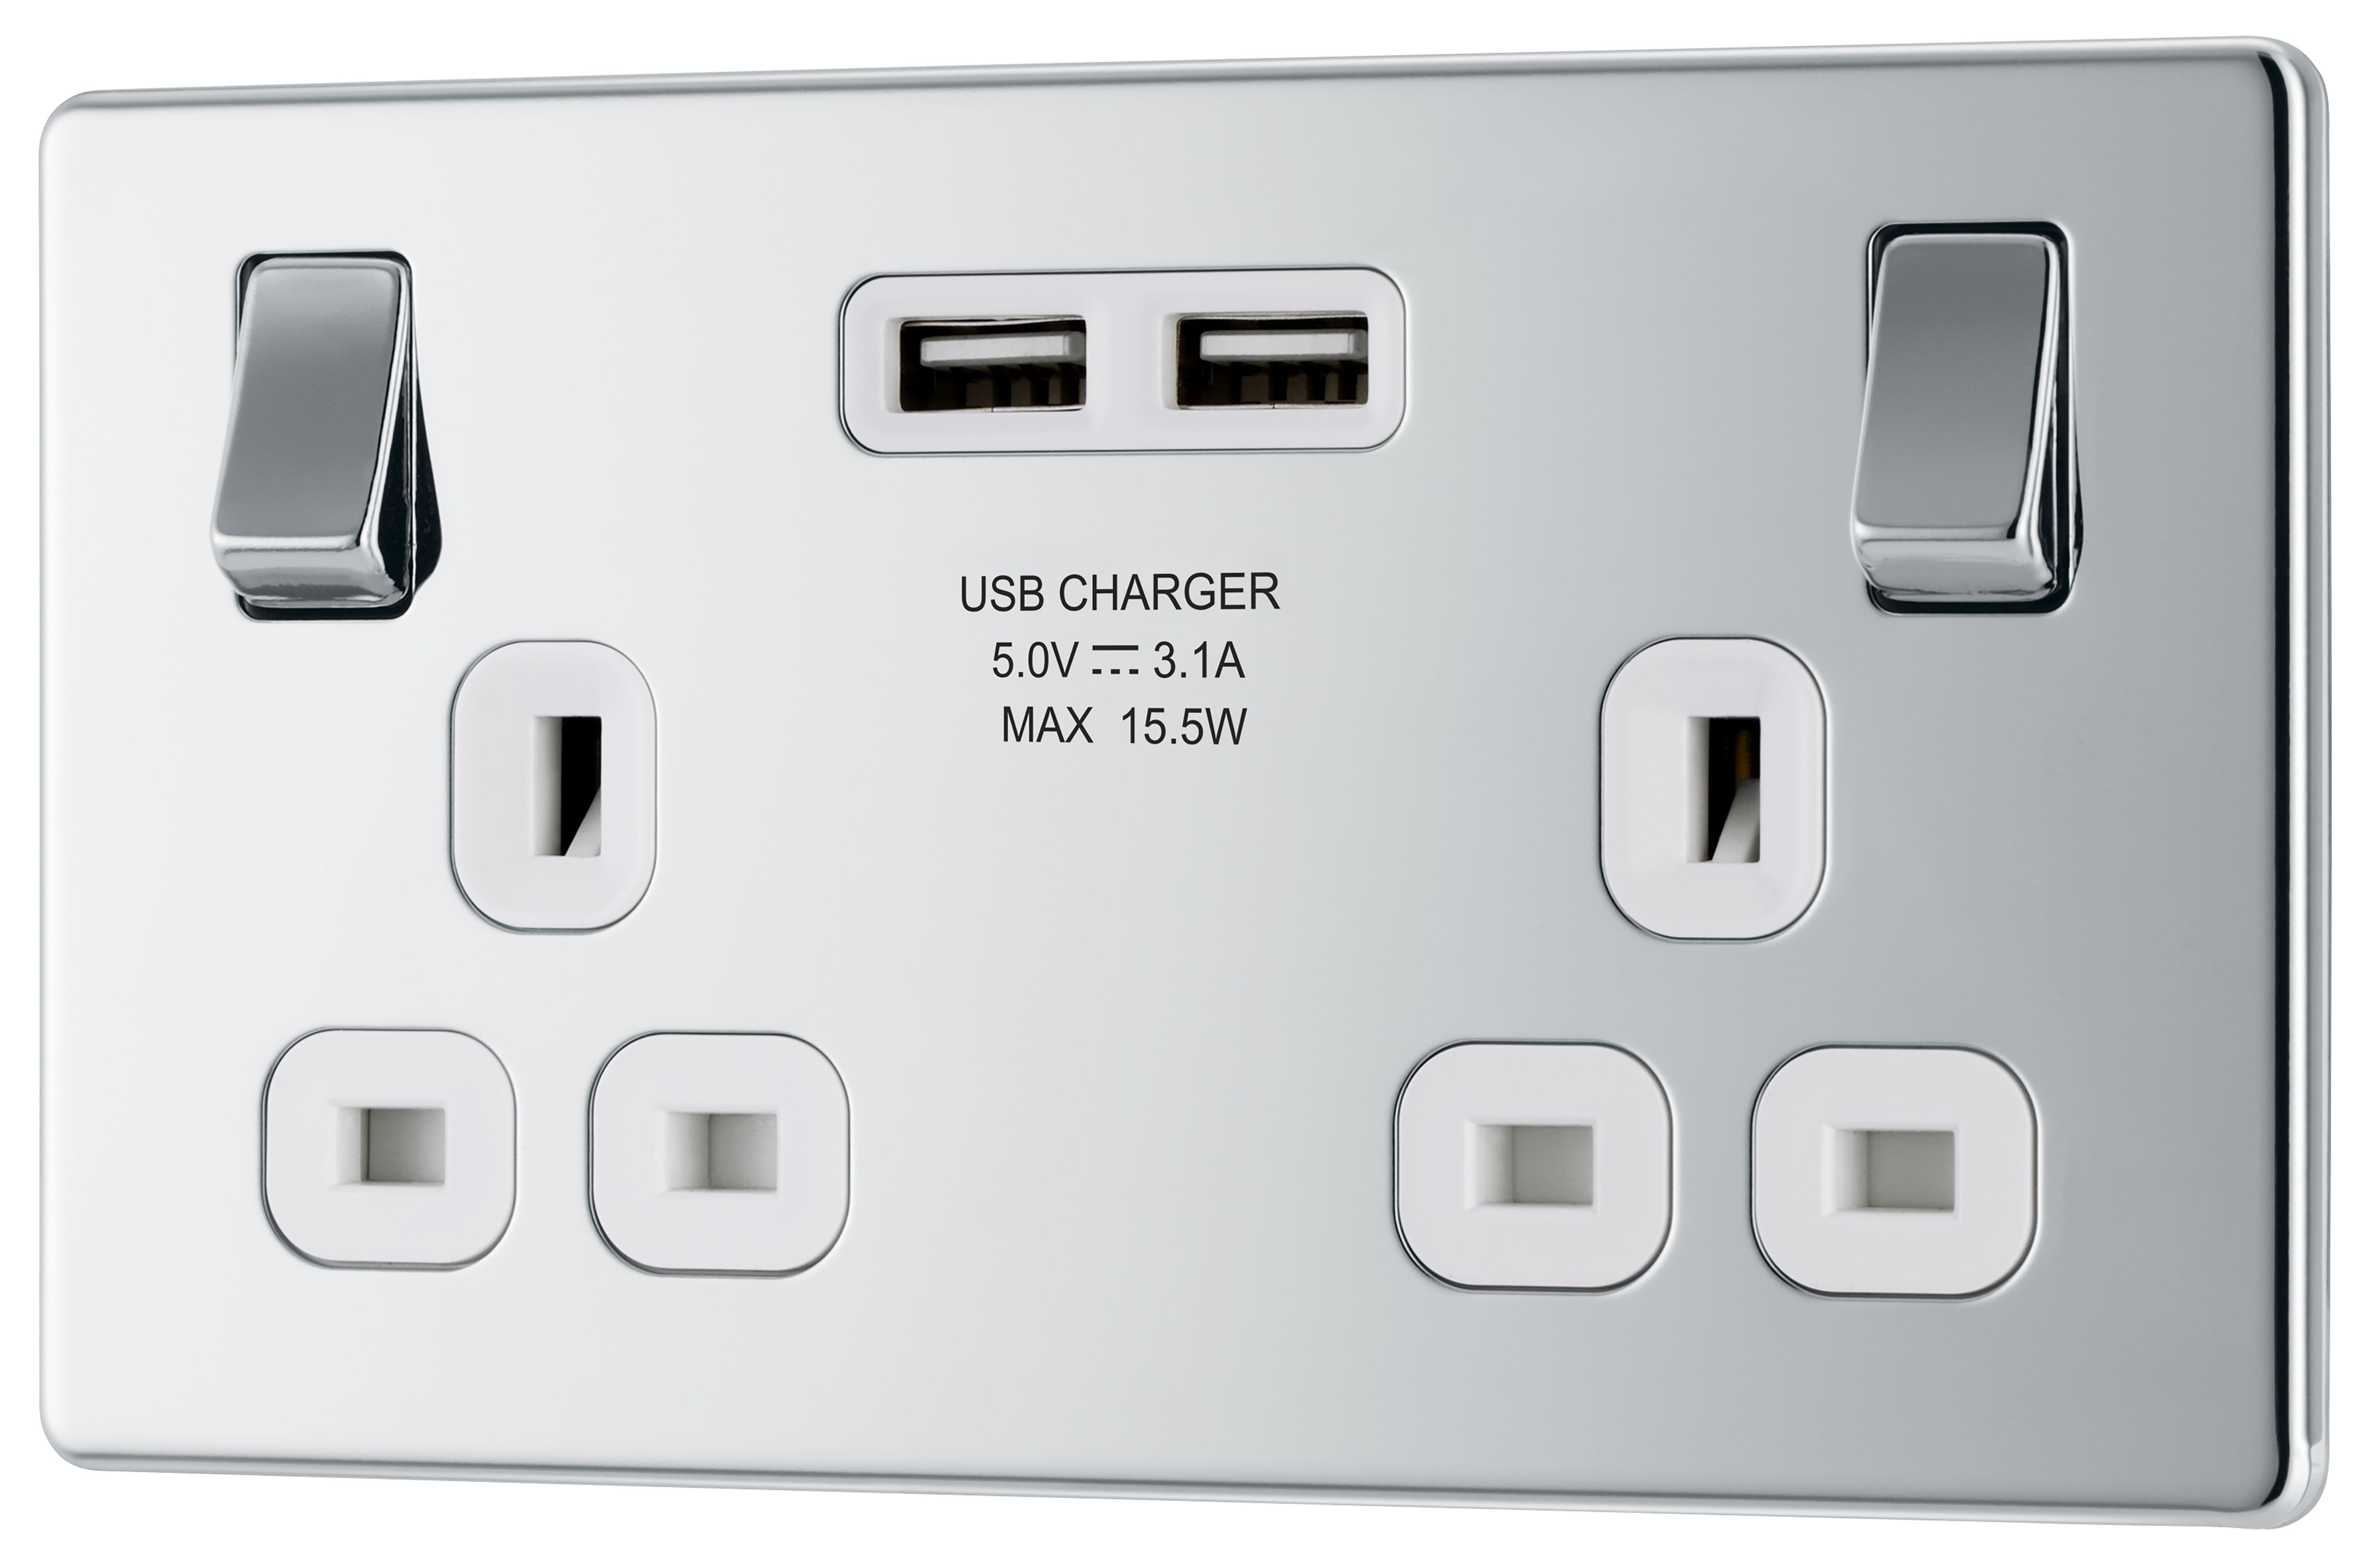 GoodHome Chrome Double 13A Screwless Switched Socket with USB x2 3.1A & White inserts